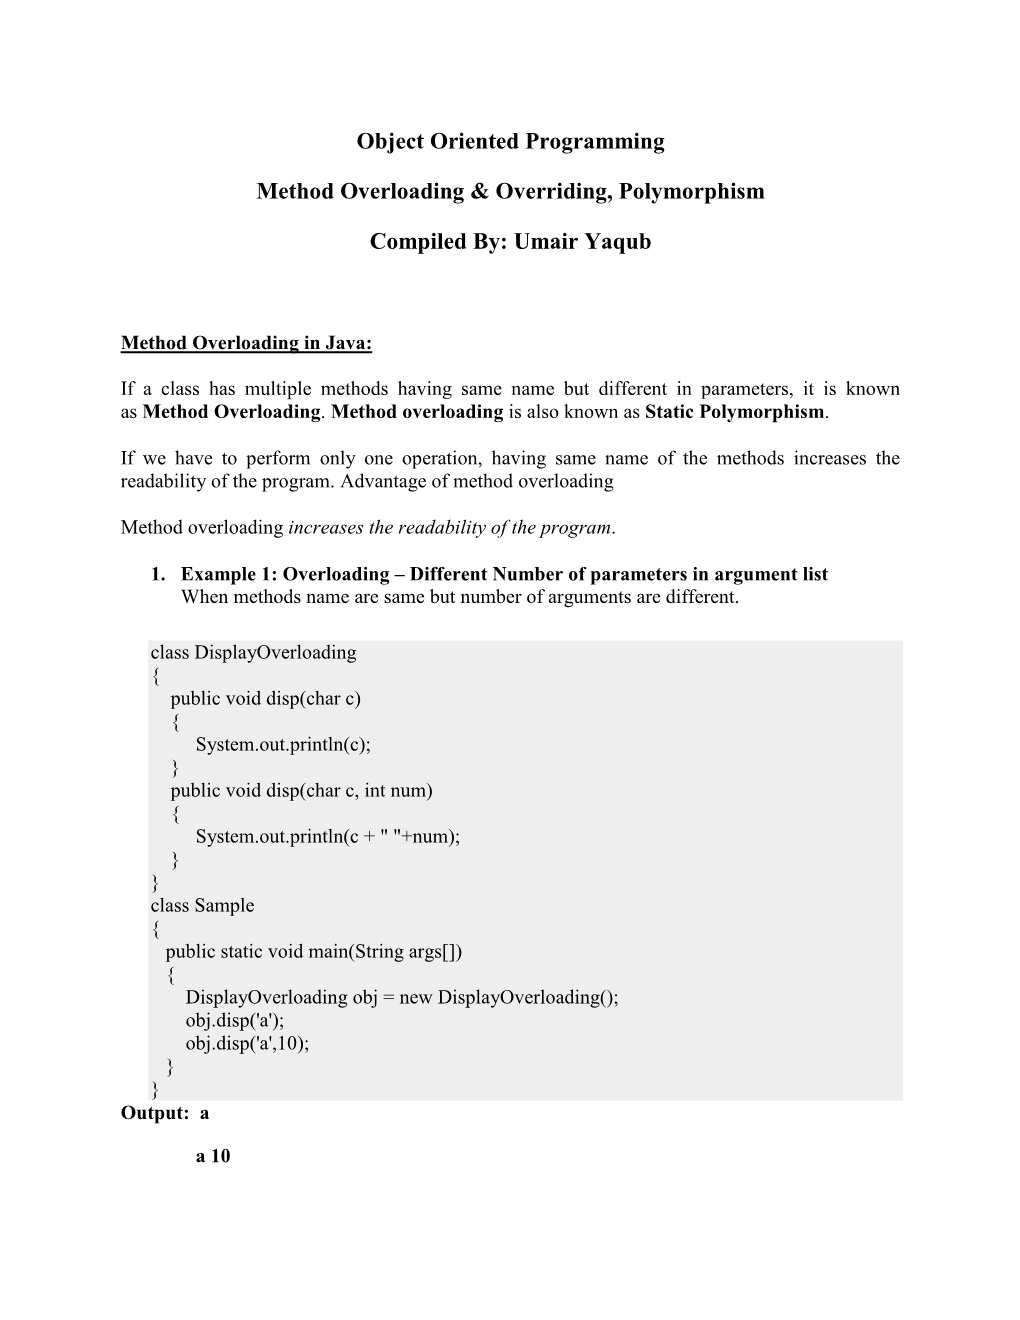 Object Oriented Programming Method Overloading & Overriding, Polymorphism Compiled By